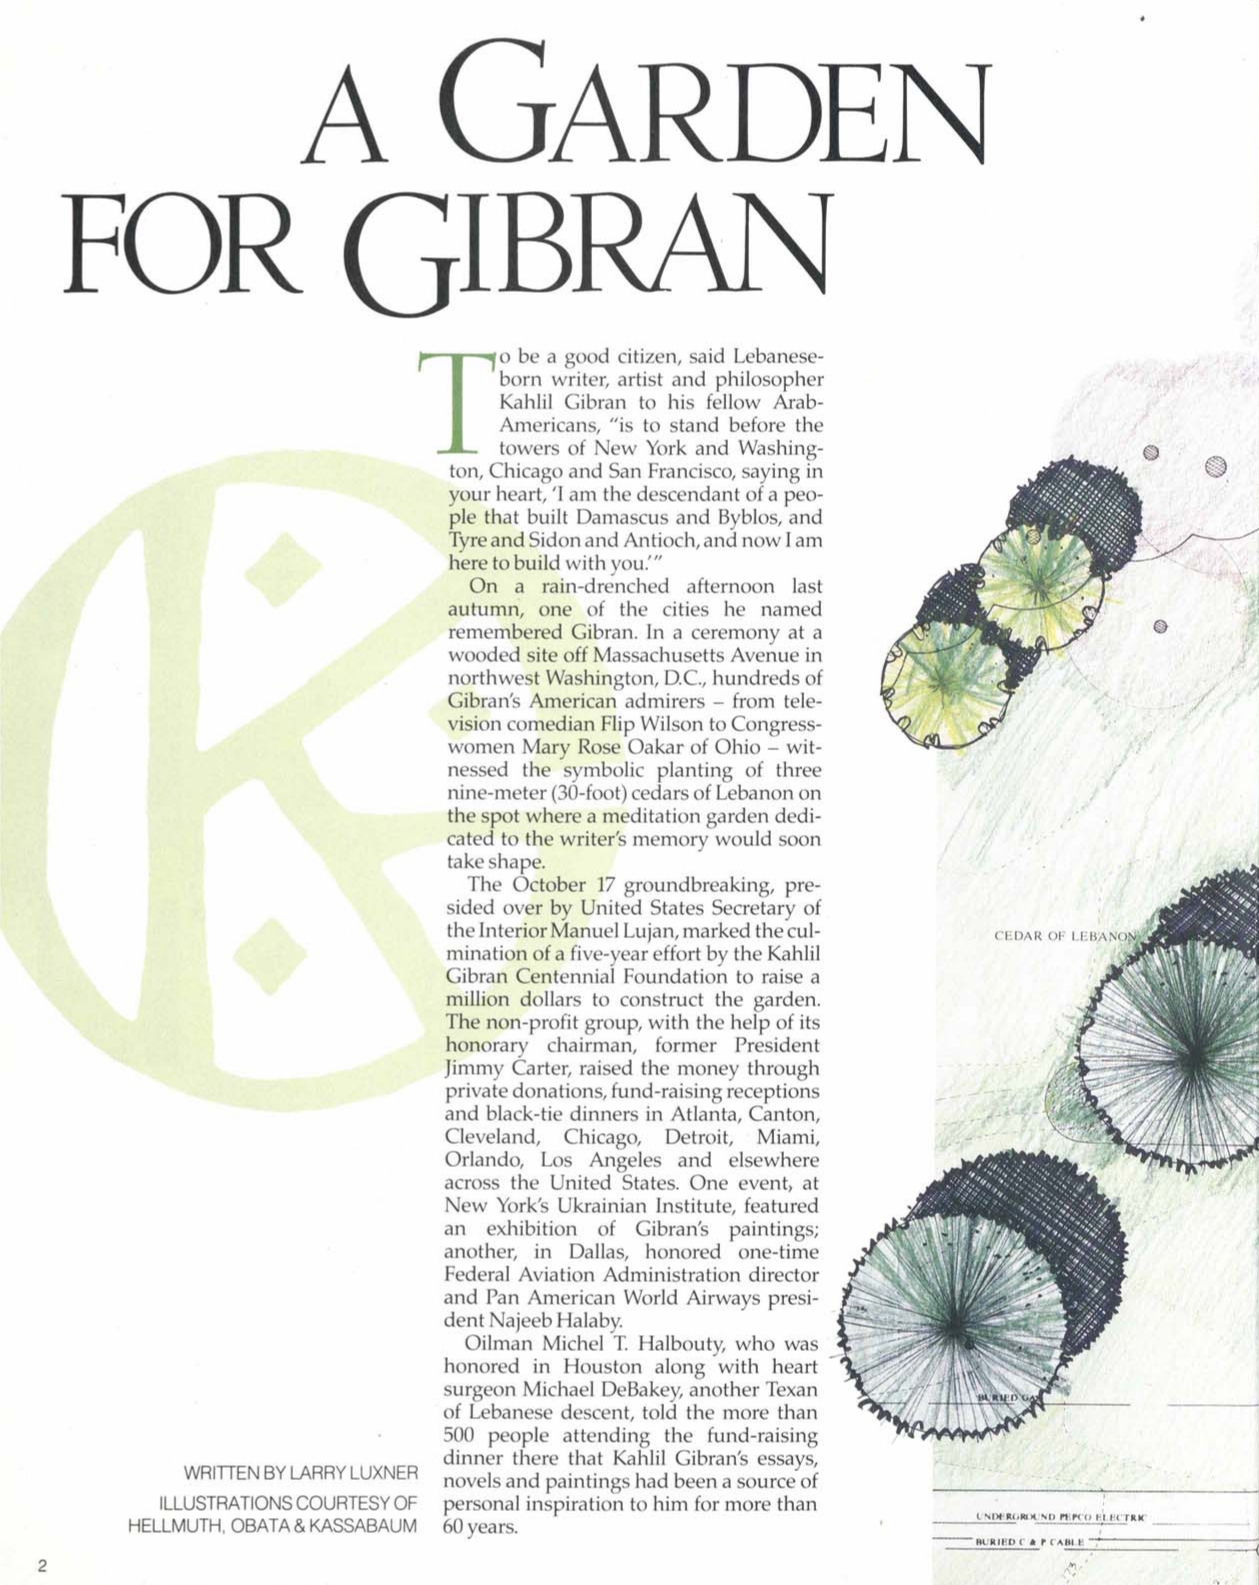 Larry Luxner, A Garden for Gibran, Aramco World Magazine, March-April 1990, pp. 2-5.